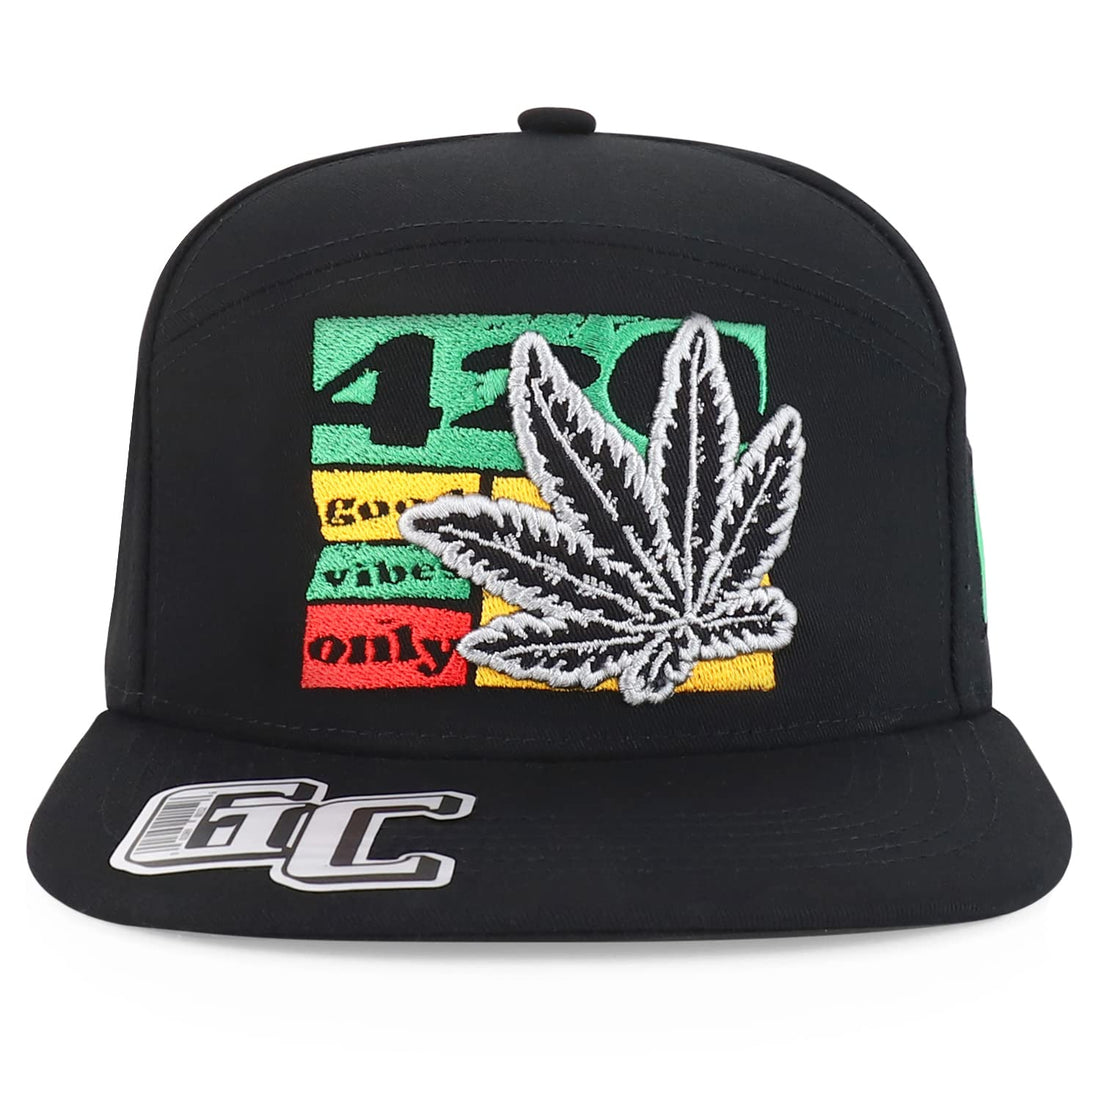 Trendy Apparel Shop 420 Good Vibes Only Embroidered Flatbill Snapback Cap